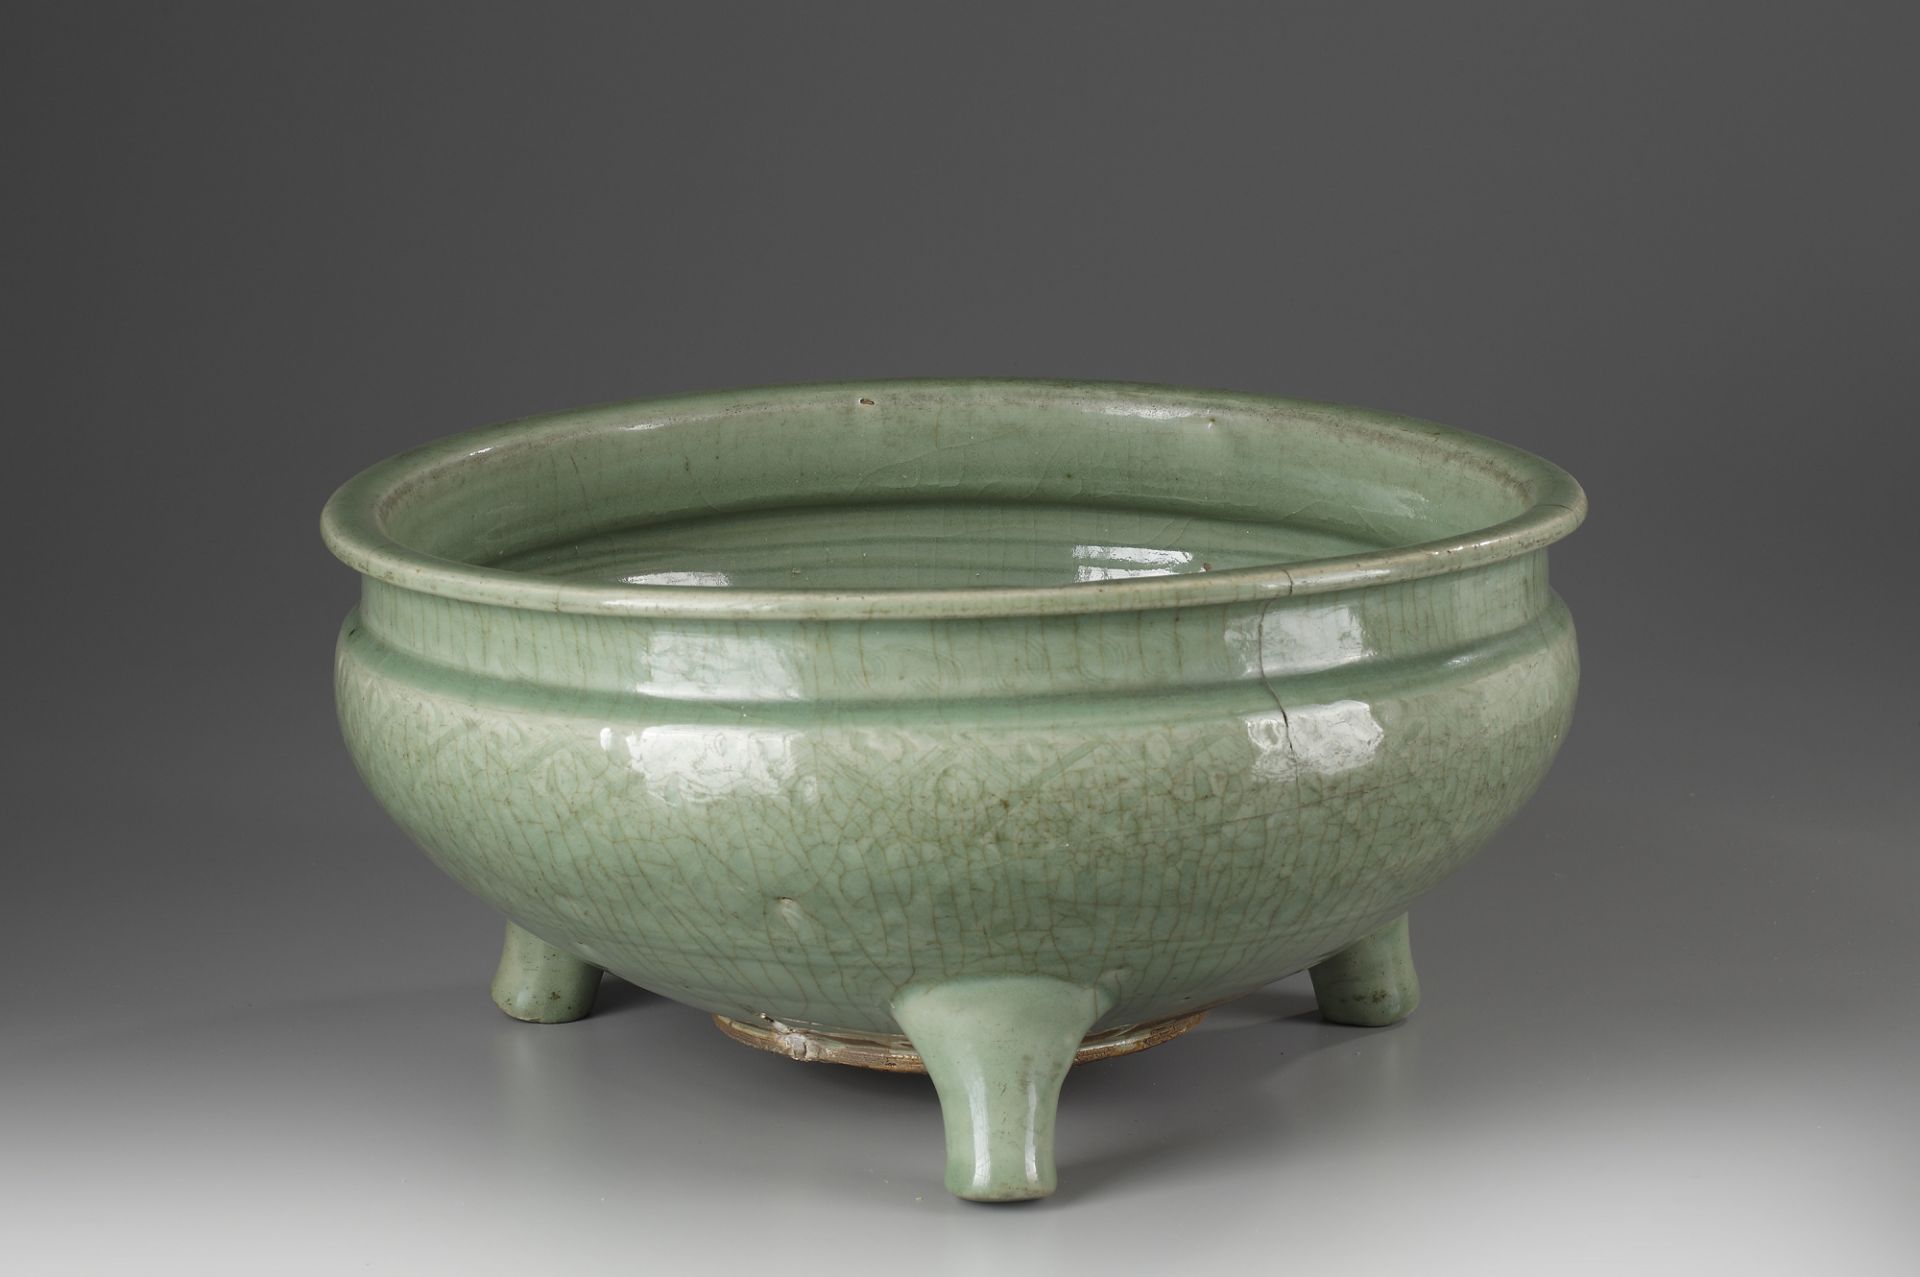 A LARGE CELADON 'LONGQUAN' TRIPOD CENSER, MING DYNASTY (1368-1644) - Image 4 of 6